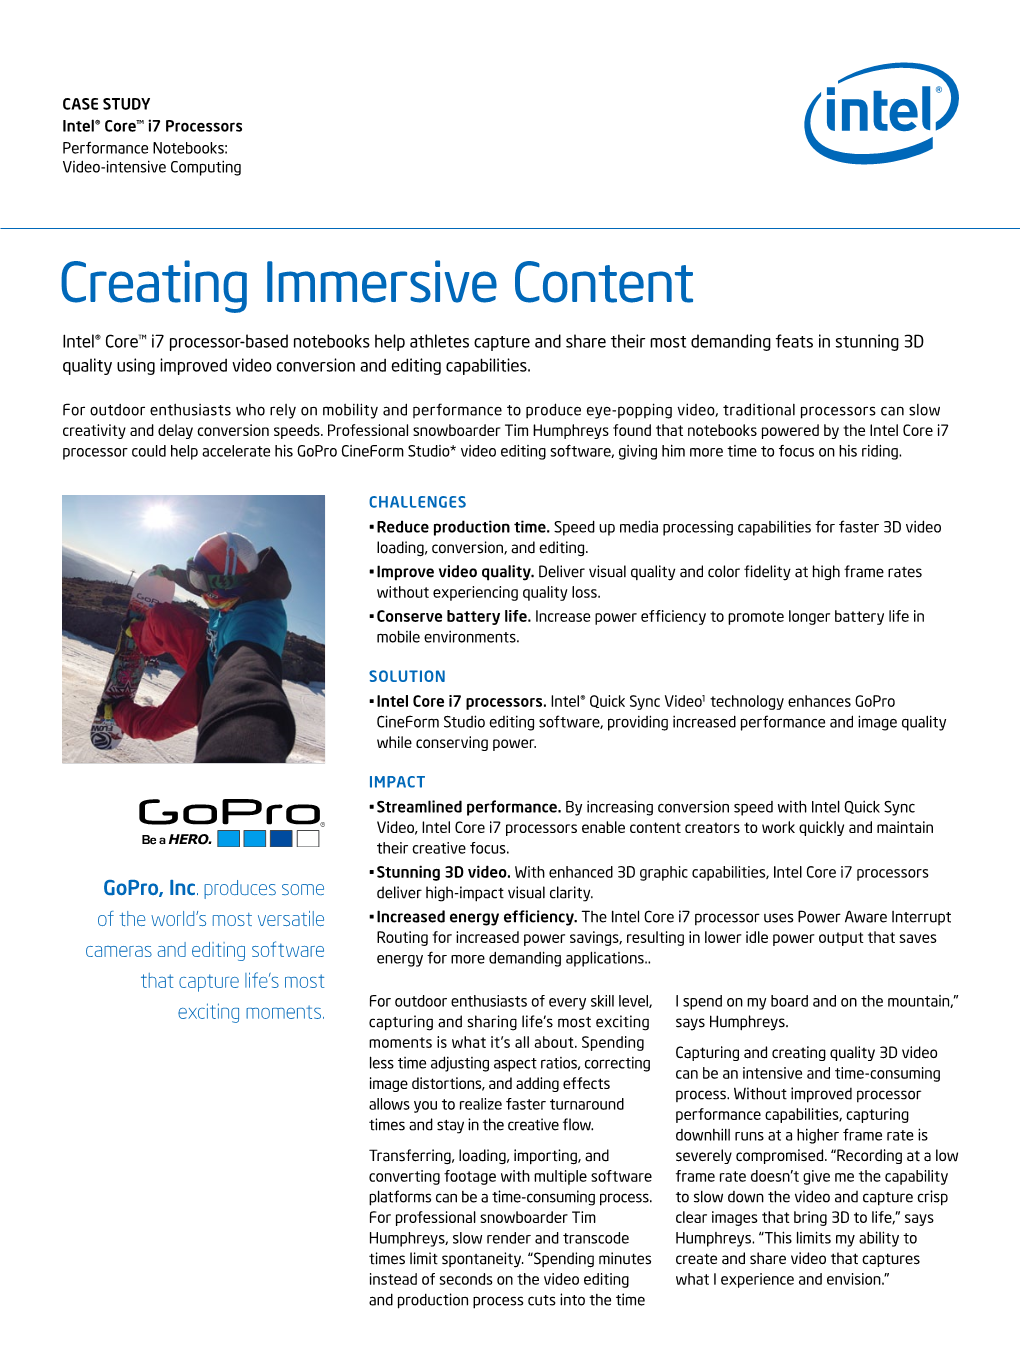 Creating Immersive Content